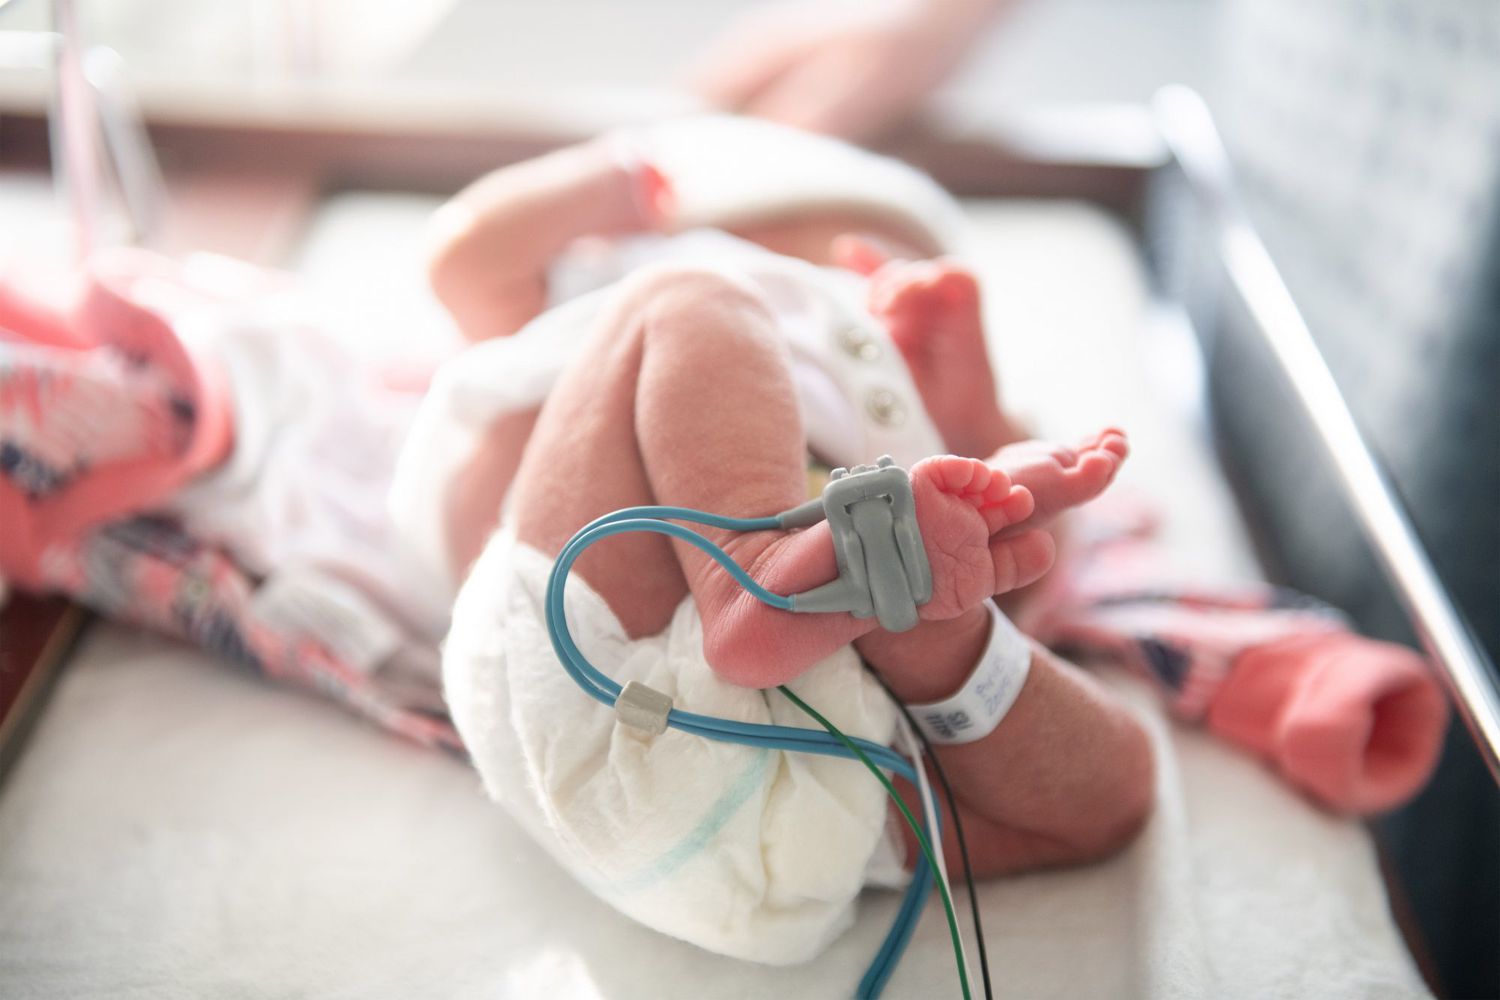 An image of a baby in the hospital.